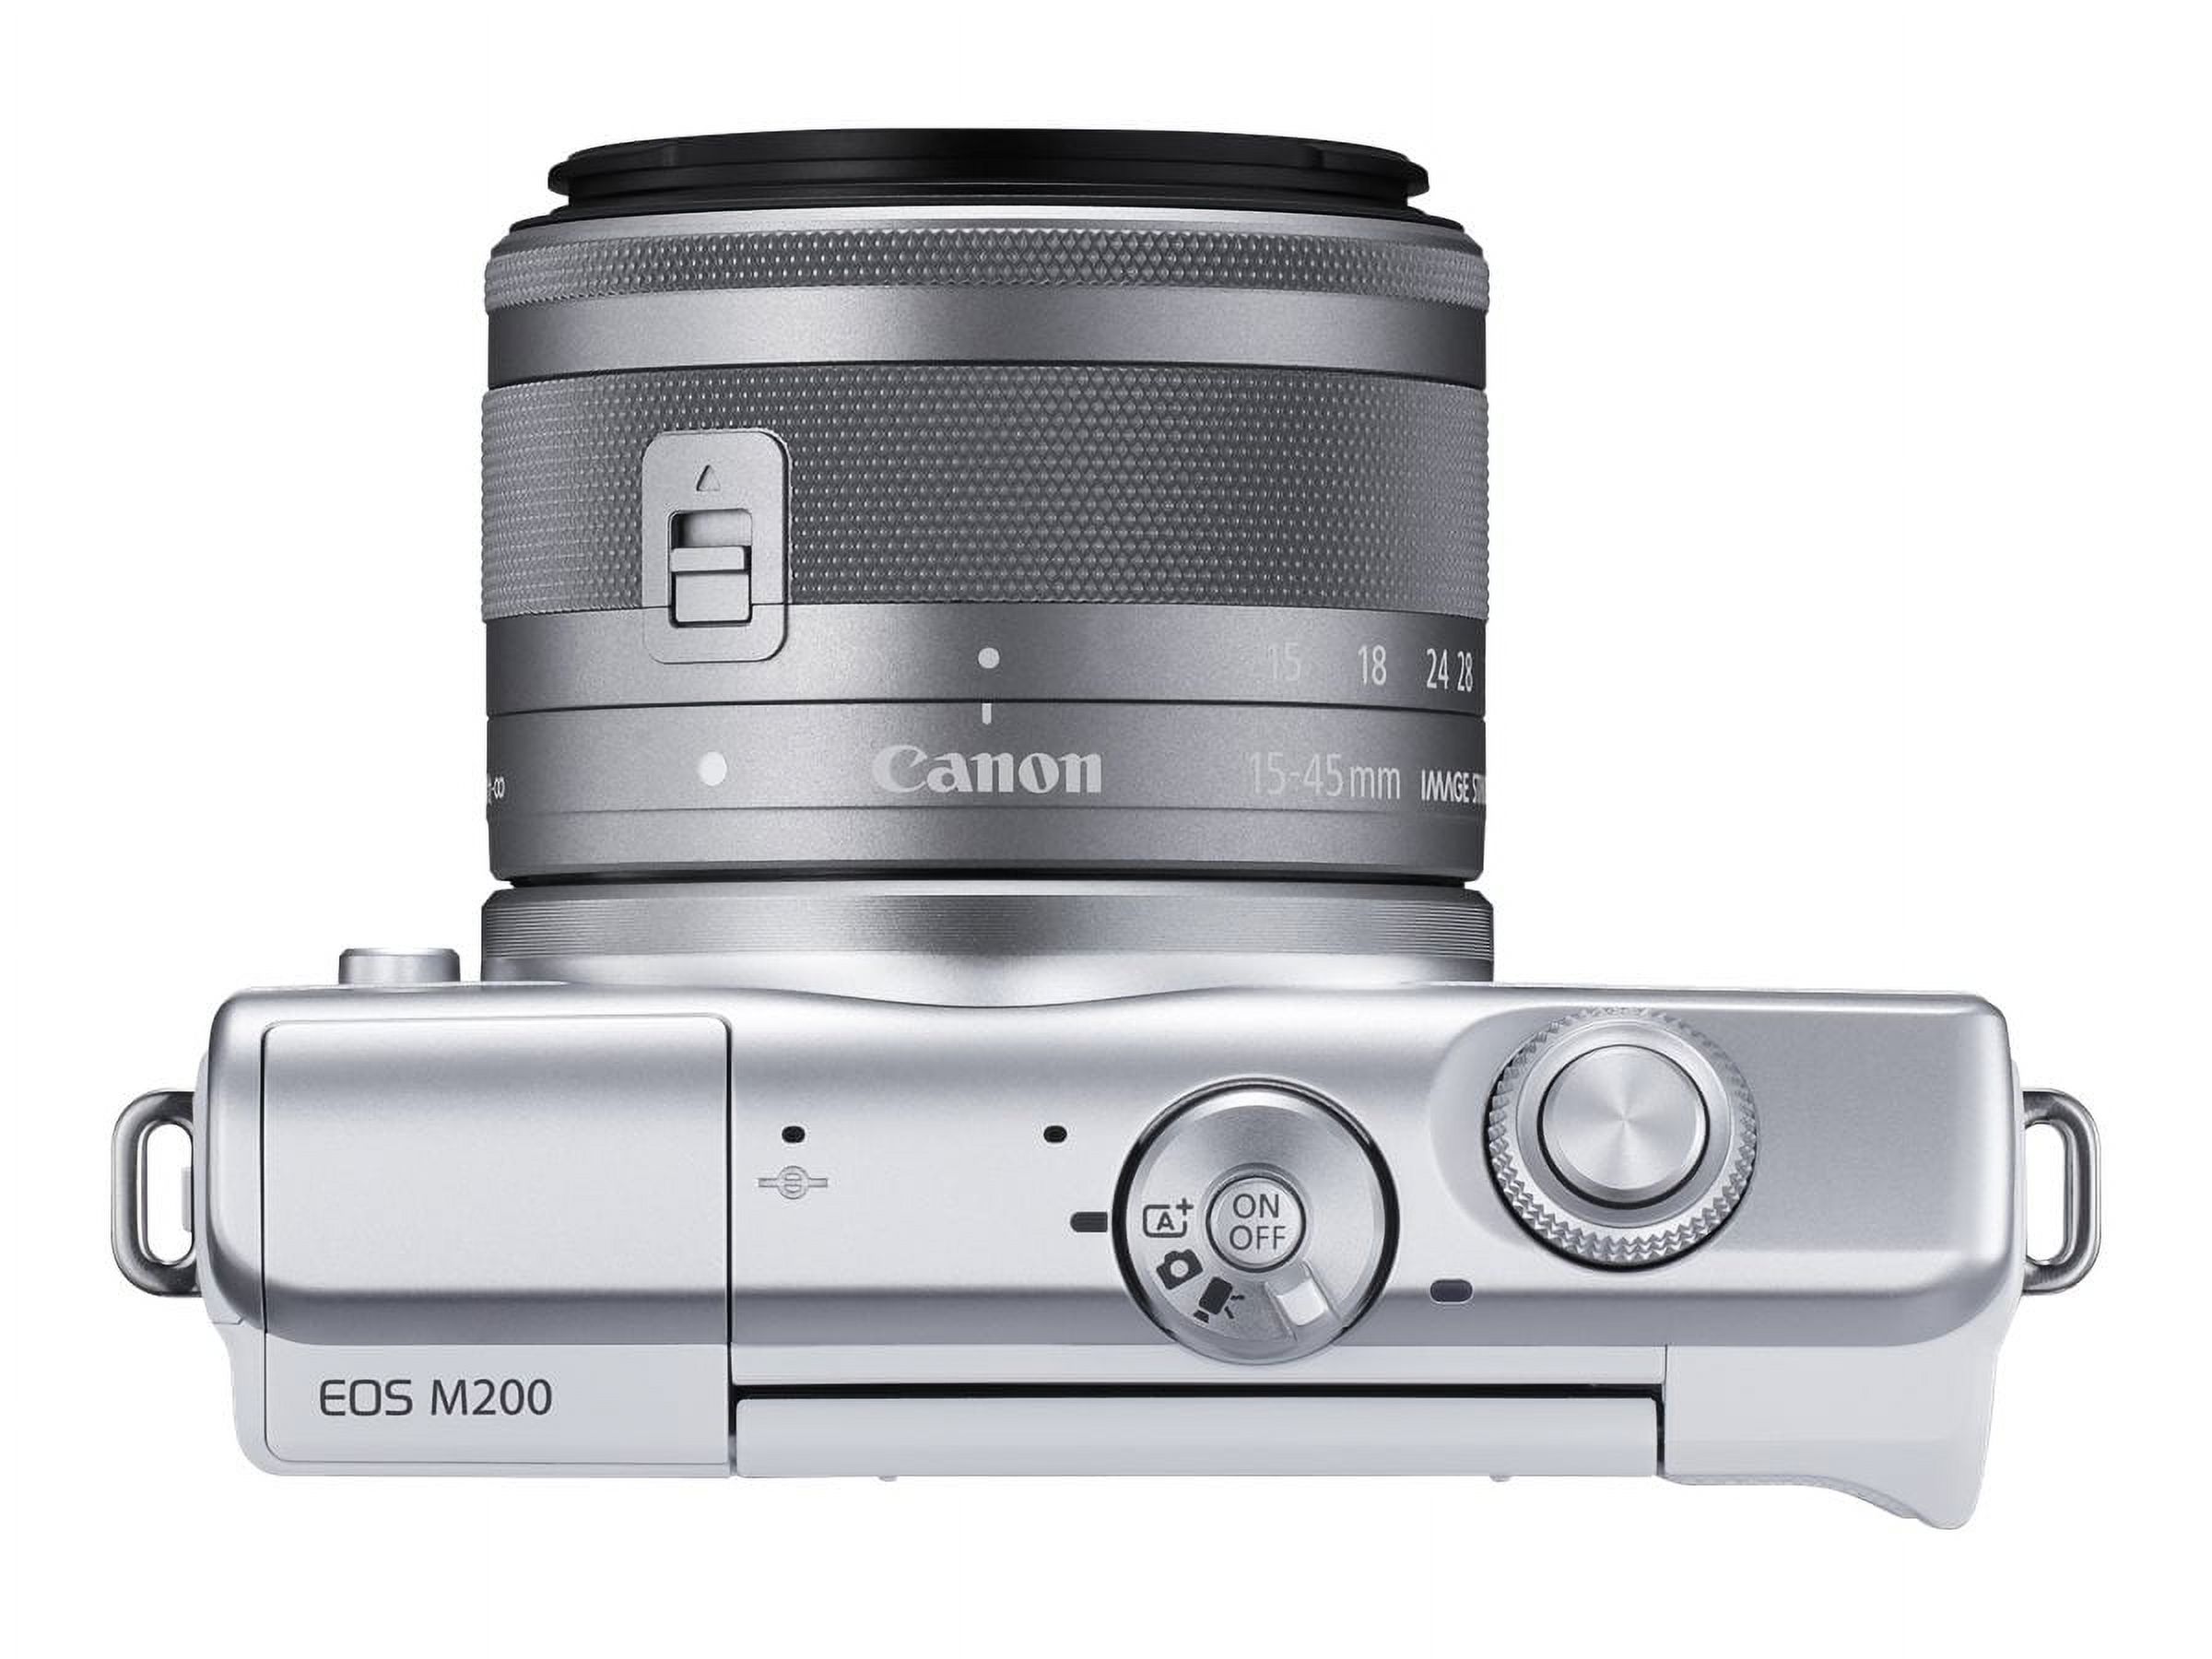 Canon EOS M200 - Digital camera - mirrorless - 24.1 MP - APS-C - 4K / 25 fps - 3x optical zoom EF-M 15-45mm IS STM lens - Wi-Fi, Bluetooth - white - image 3 of 3